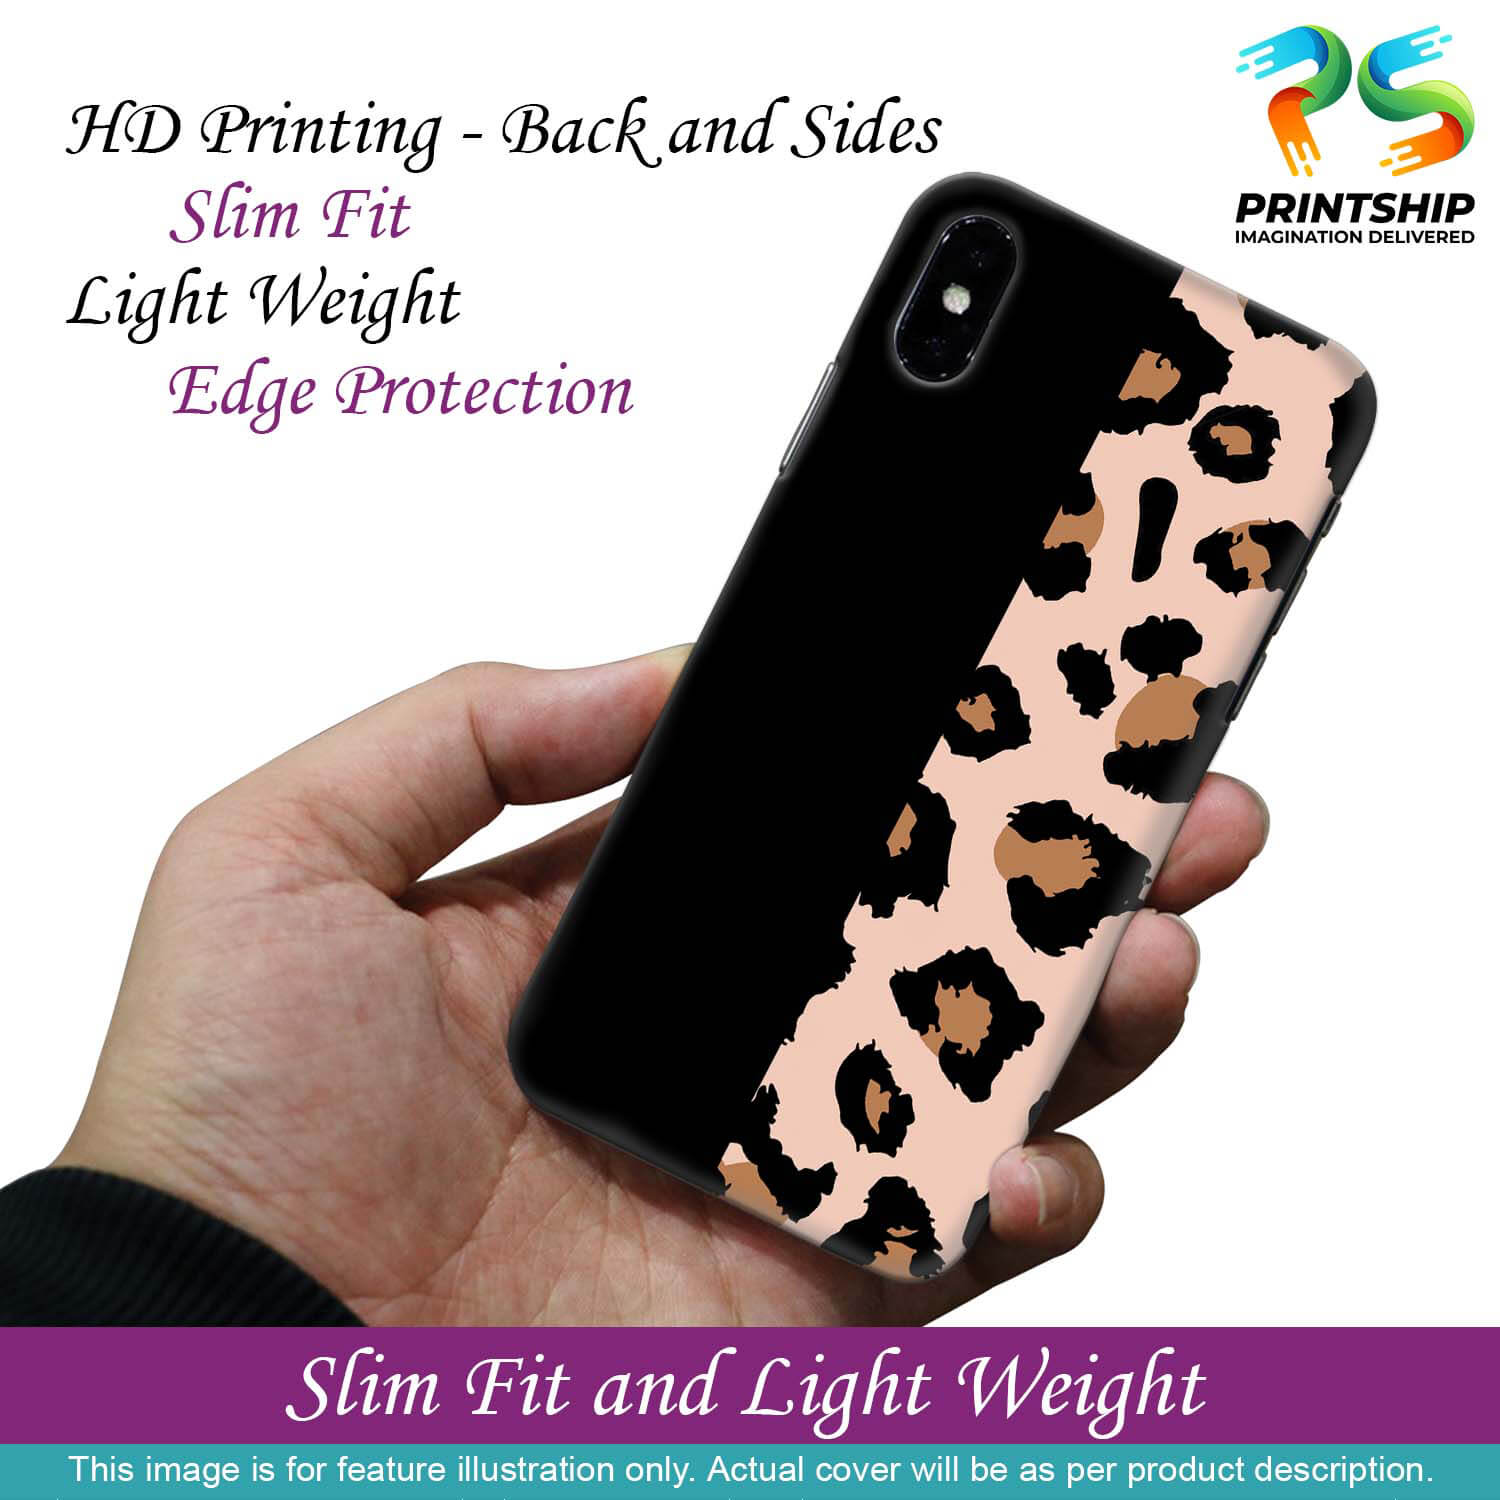 PS1339-Animal Patterns Back Cover for Realme 5